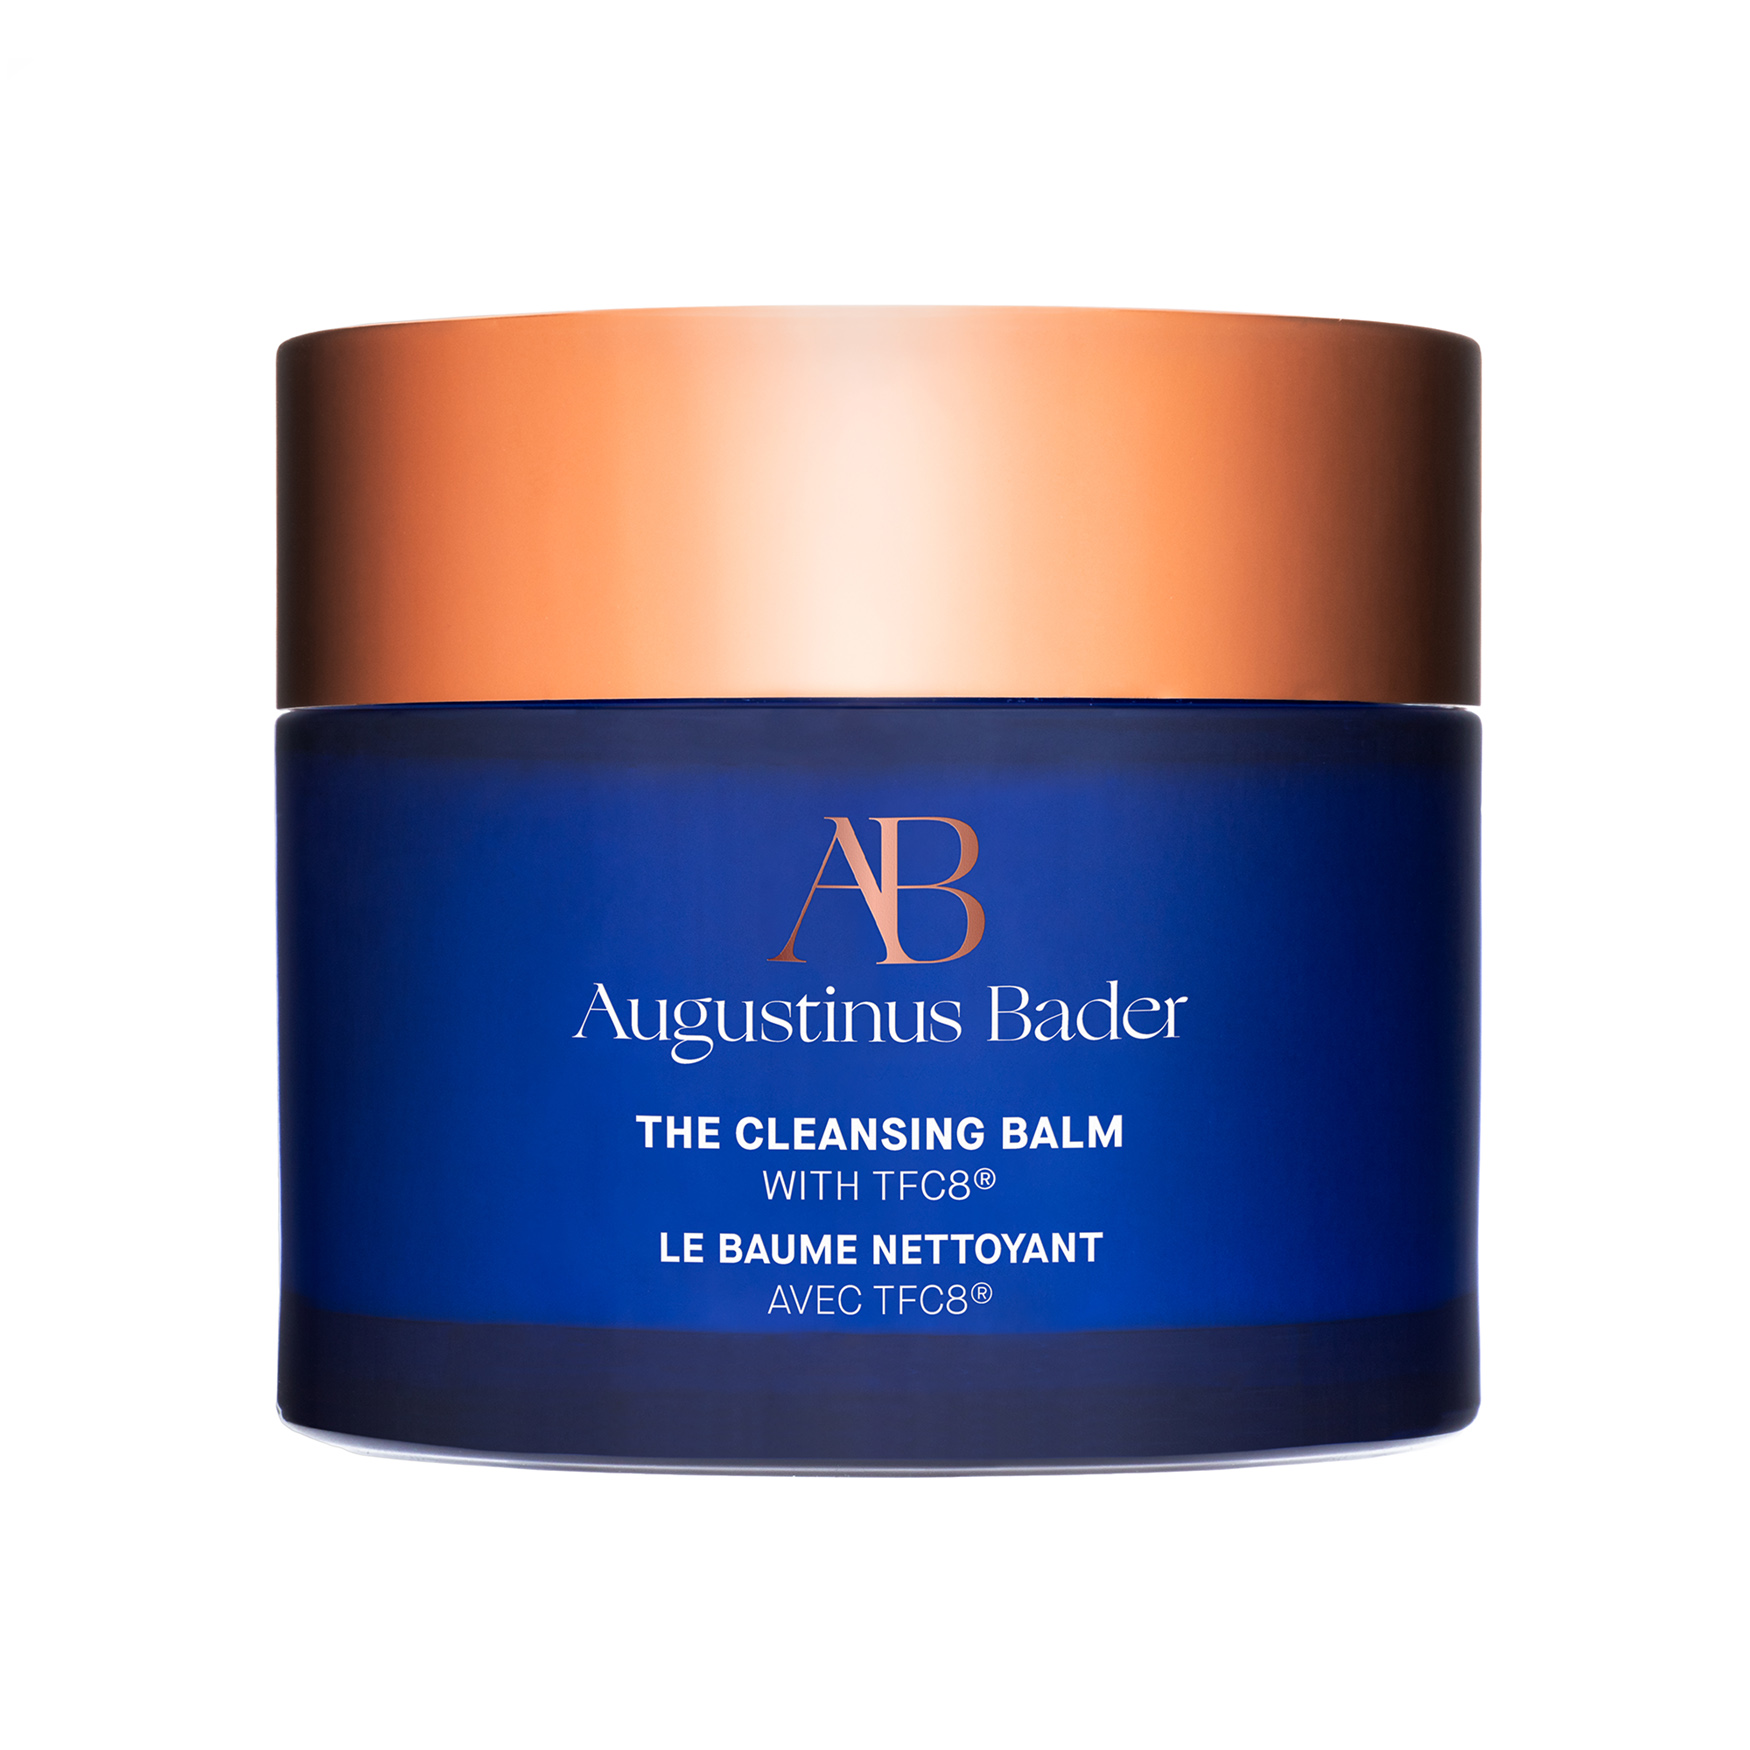 Augustinus Bader The Cleansing Balm | Space NK